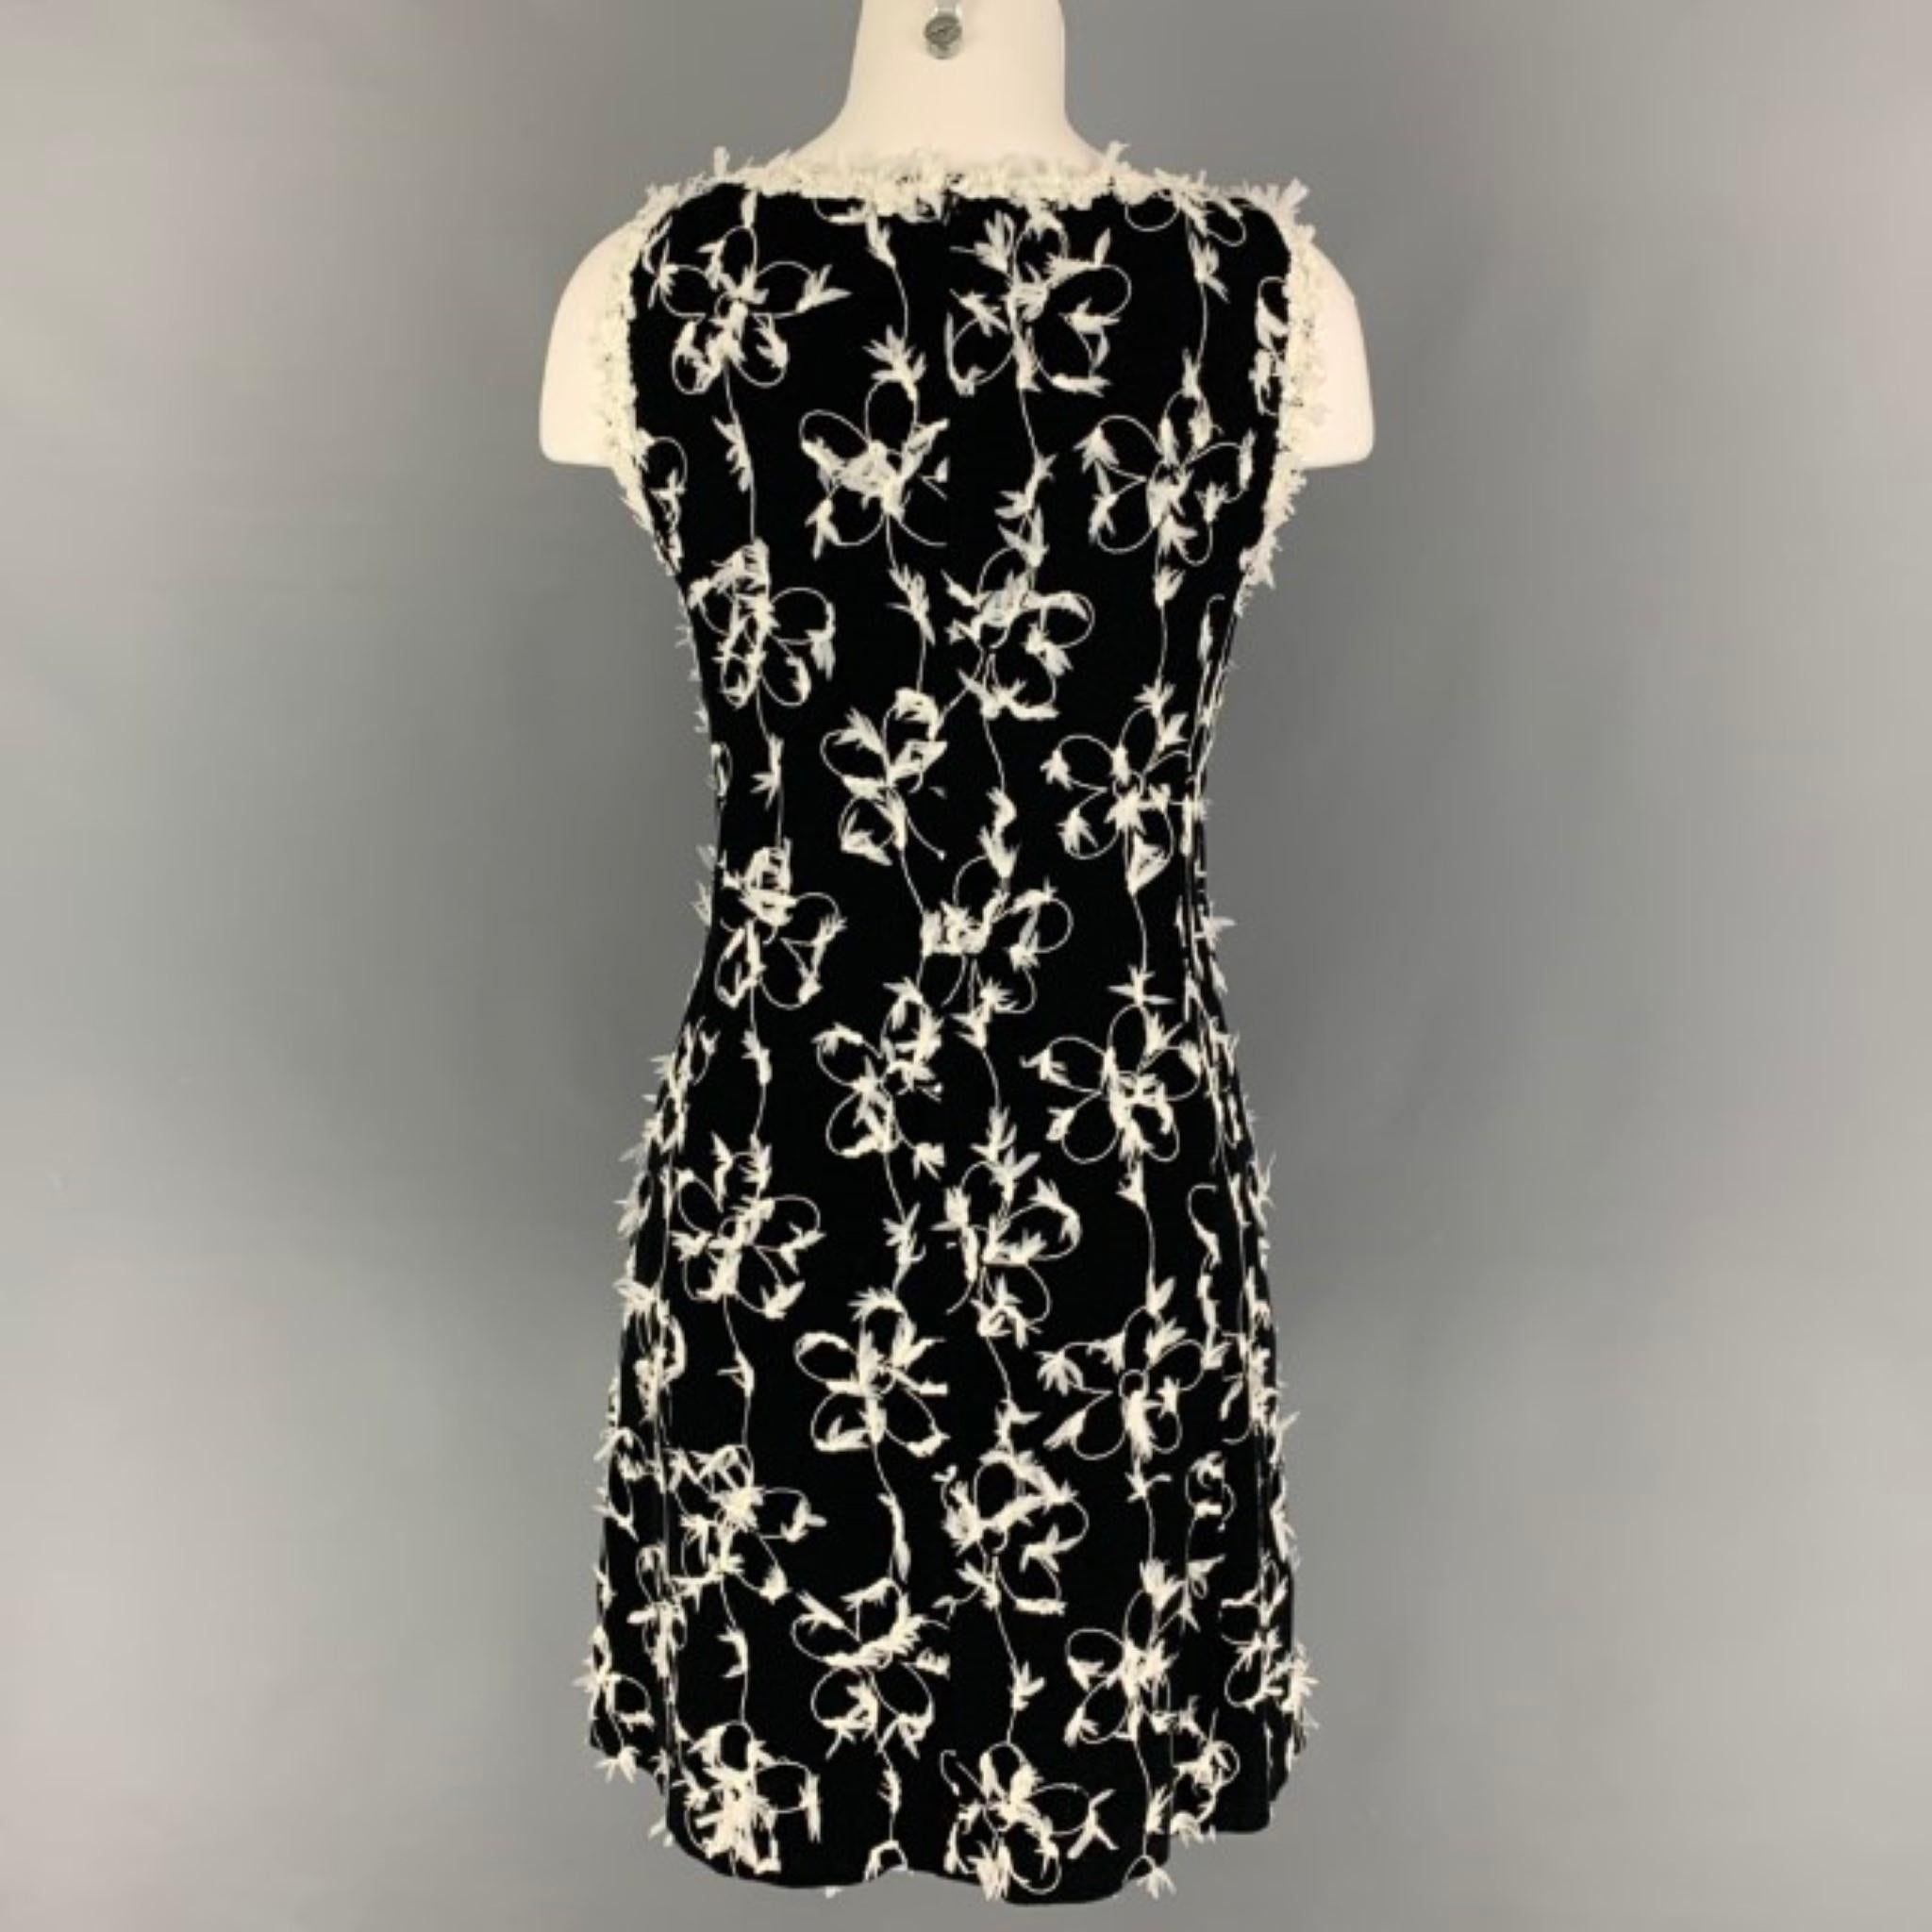 CHEAP and CHIC by MOSCHINO dress comes in a black & white featuring floral embroidered details, sheath style, slit pockets, sleeveless, and a back zipper closure. 

Very Good Pre-Owned Condition.
Marked: I 40 / D 36 / F 36 / GB 8 / USA